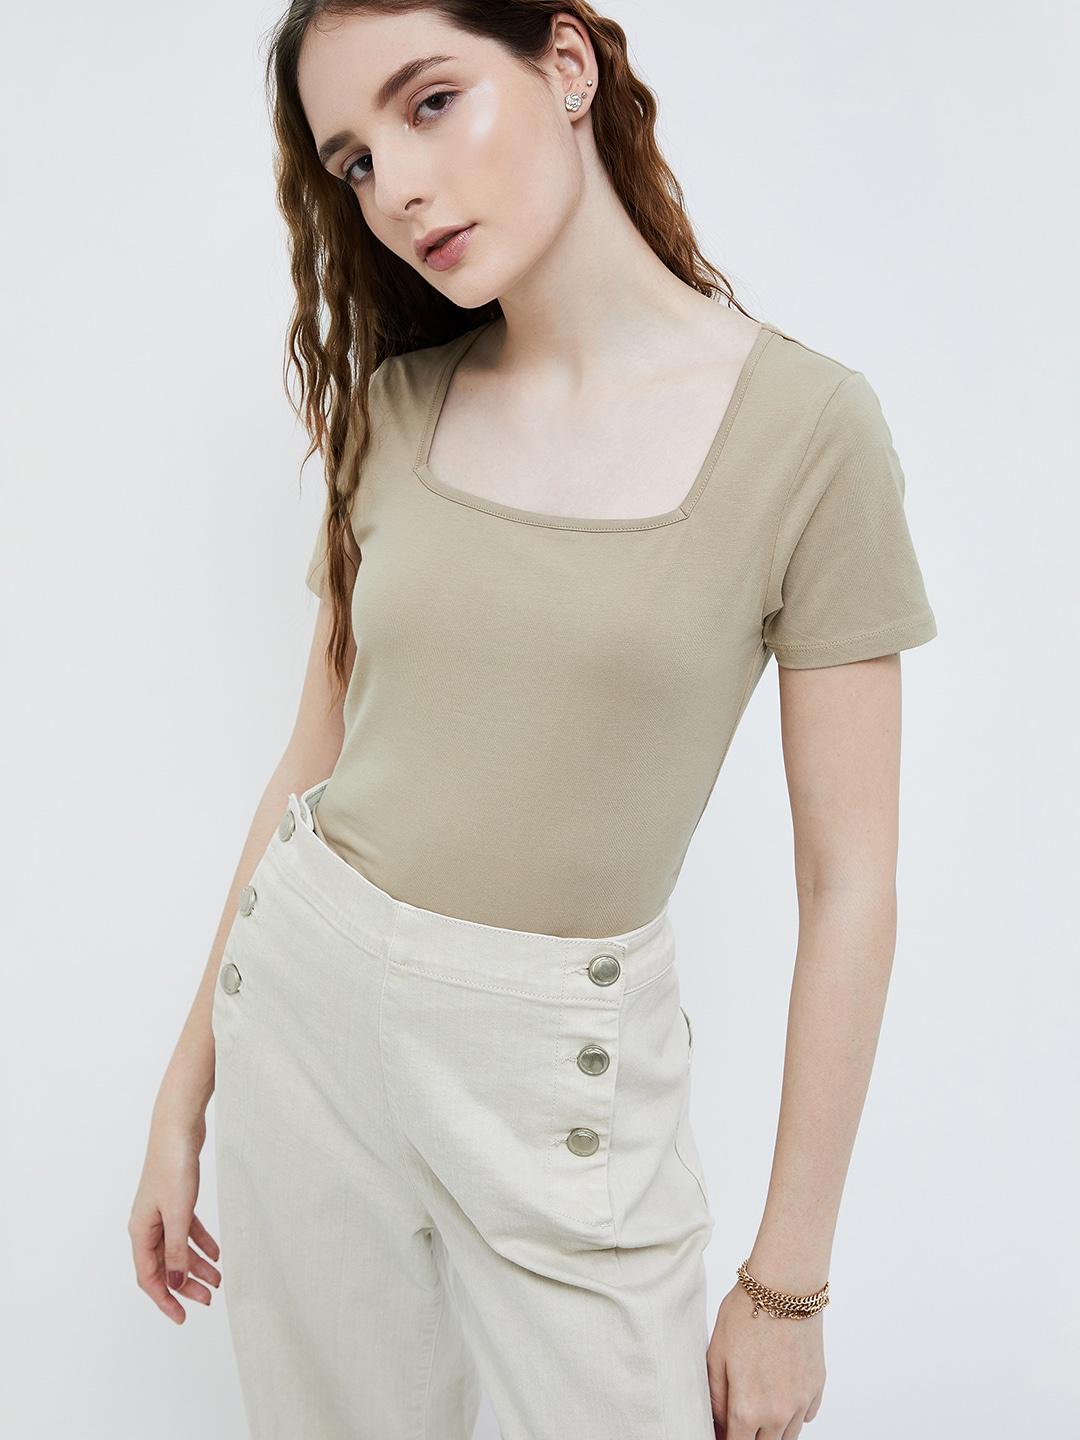 ginger by lifestyle square neck cotton top